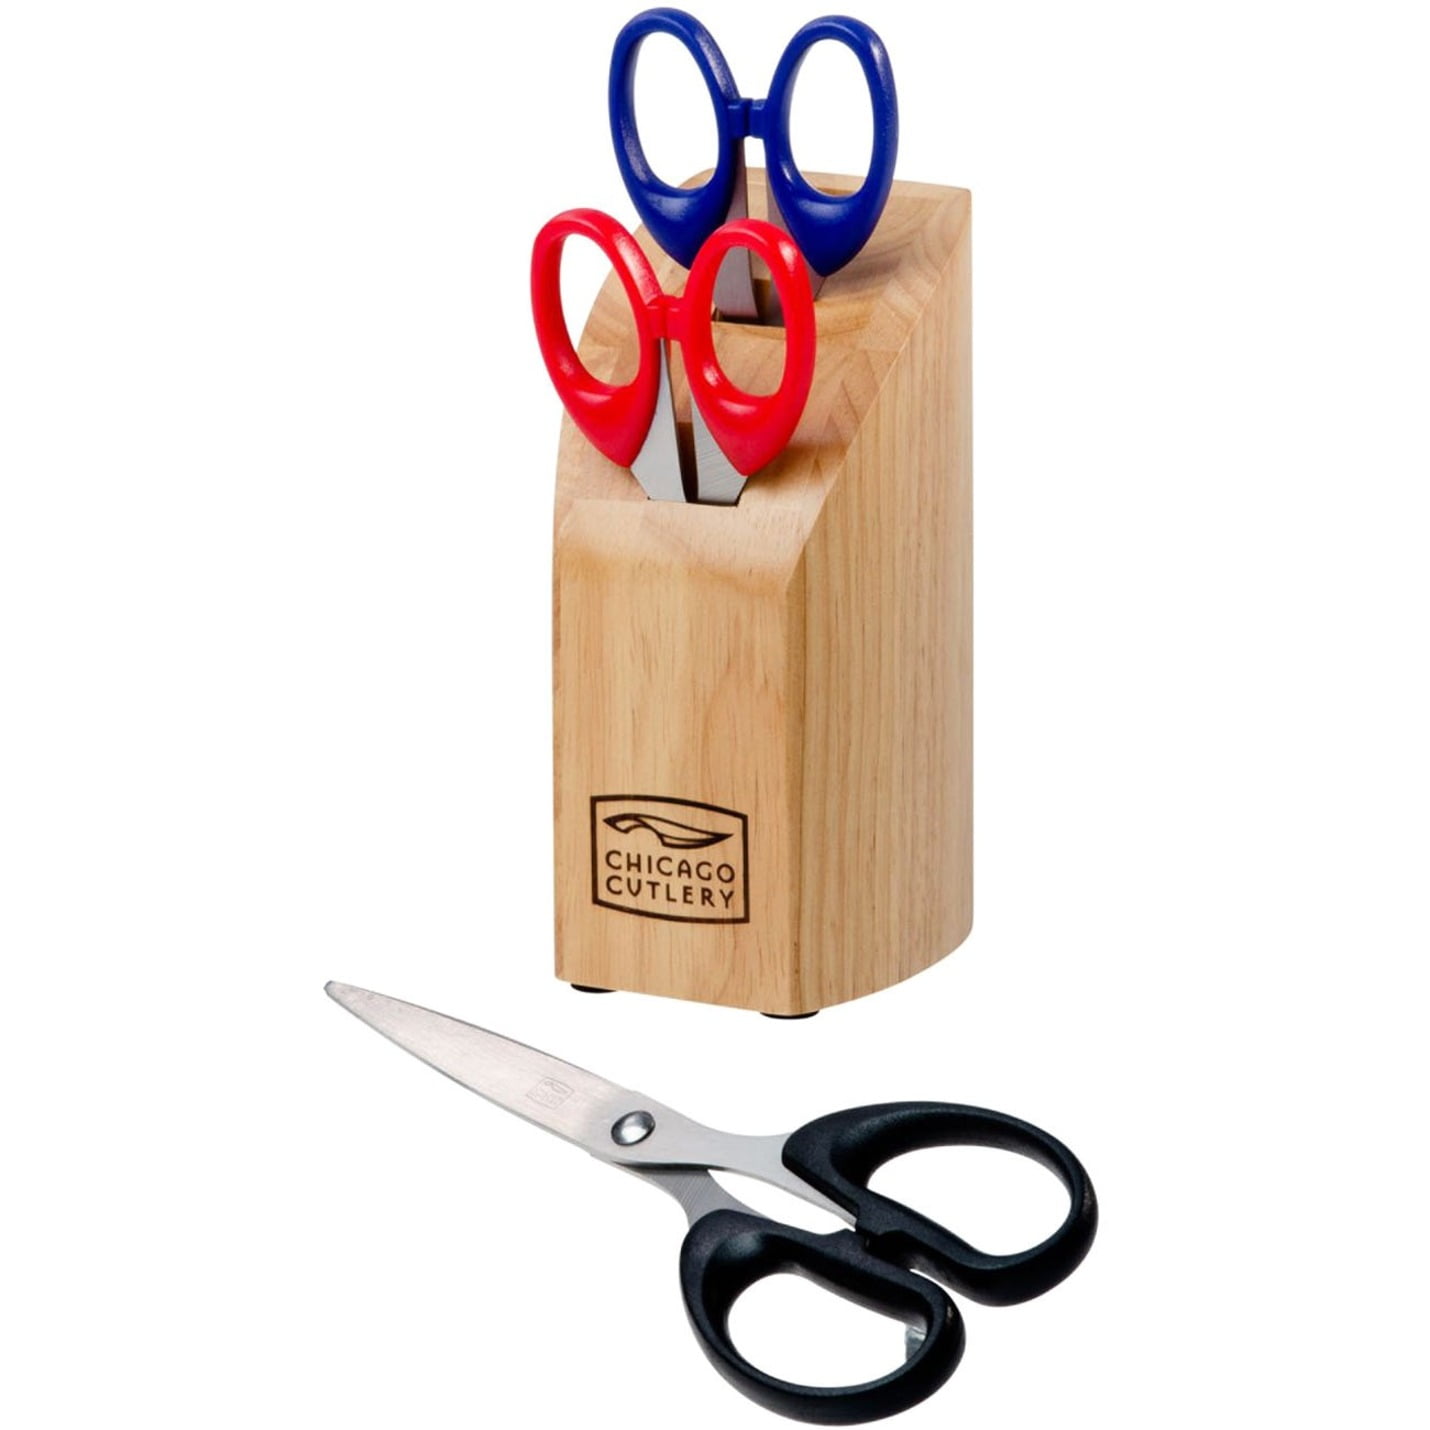 Chicago Cutlery Mint Leaf Deluxe Kitchen Shears